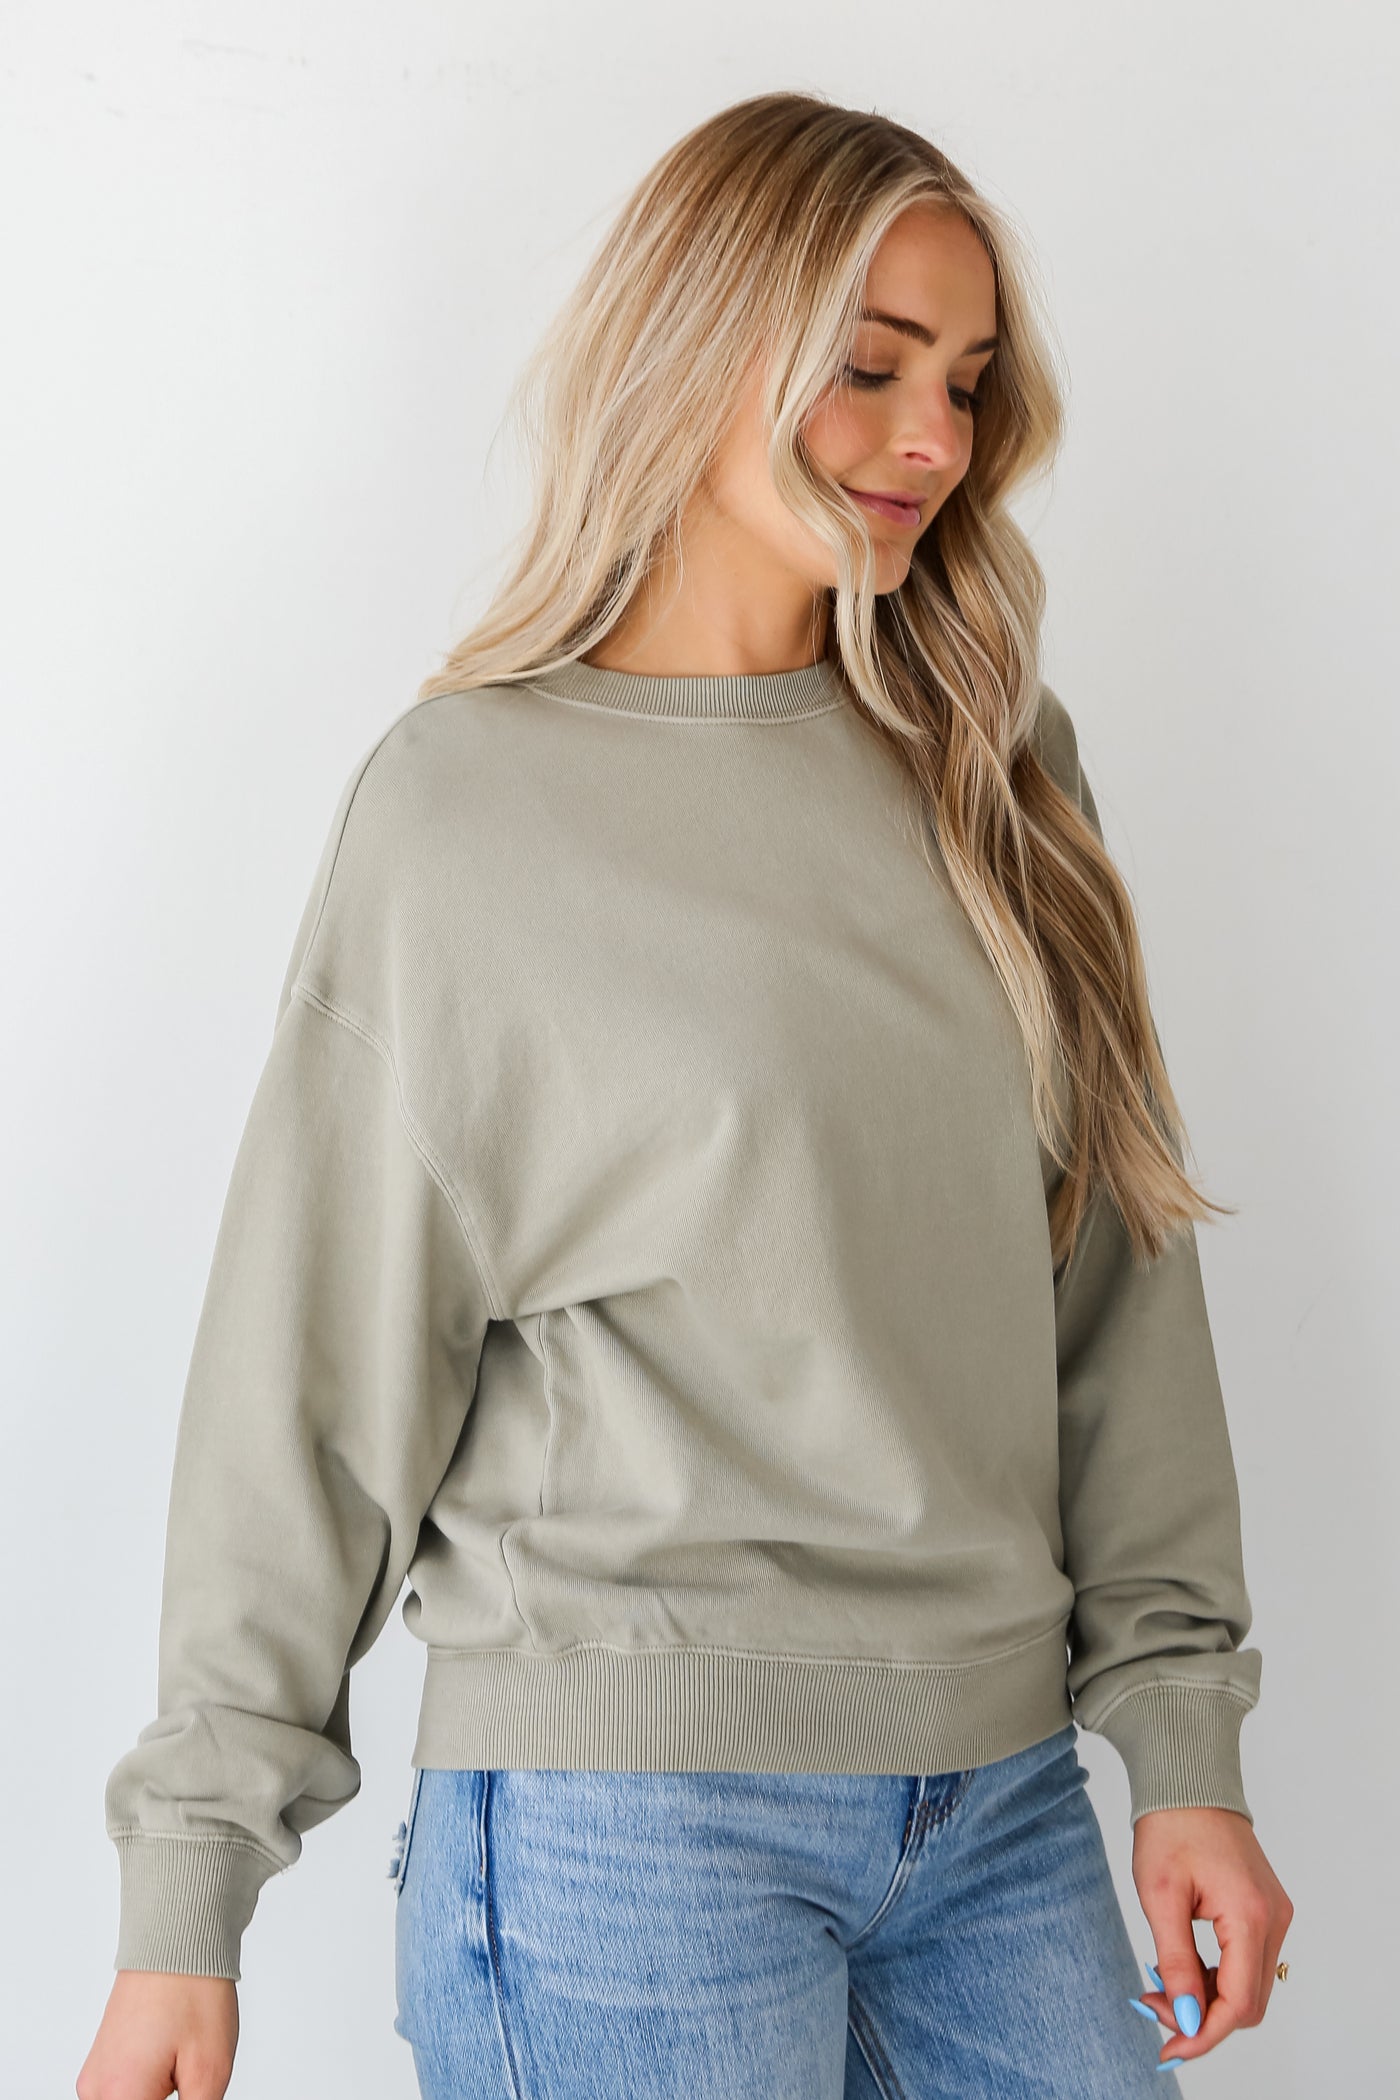 sage green Oversized Pullover for women